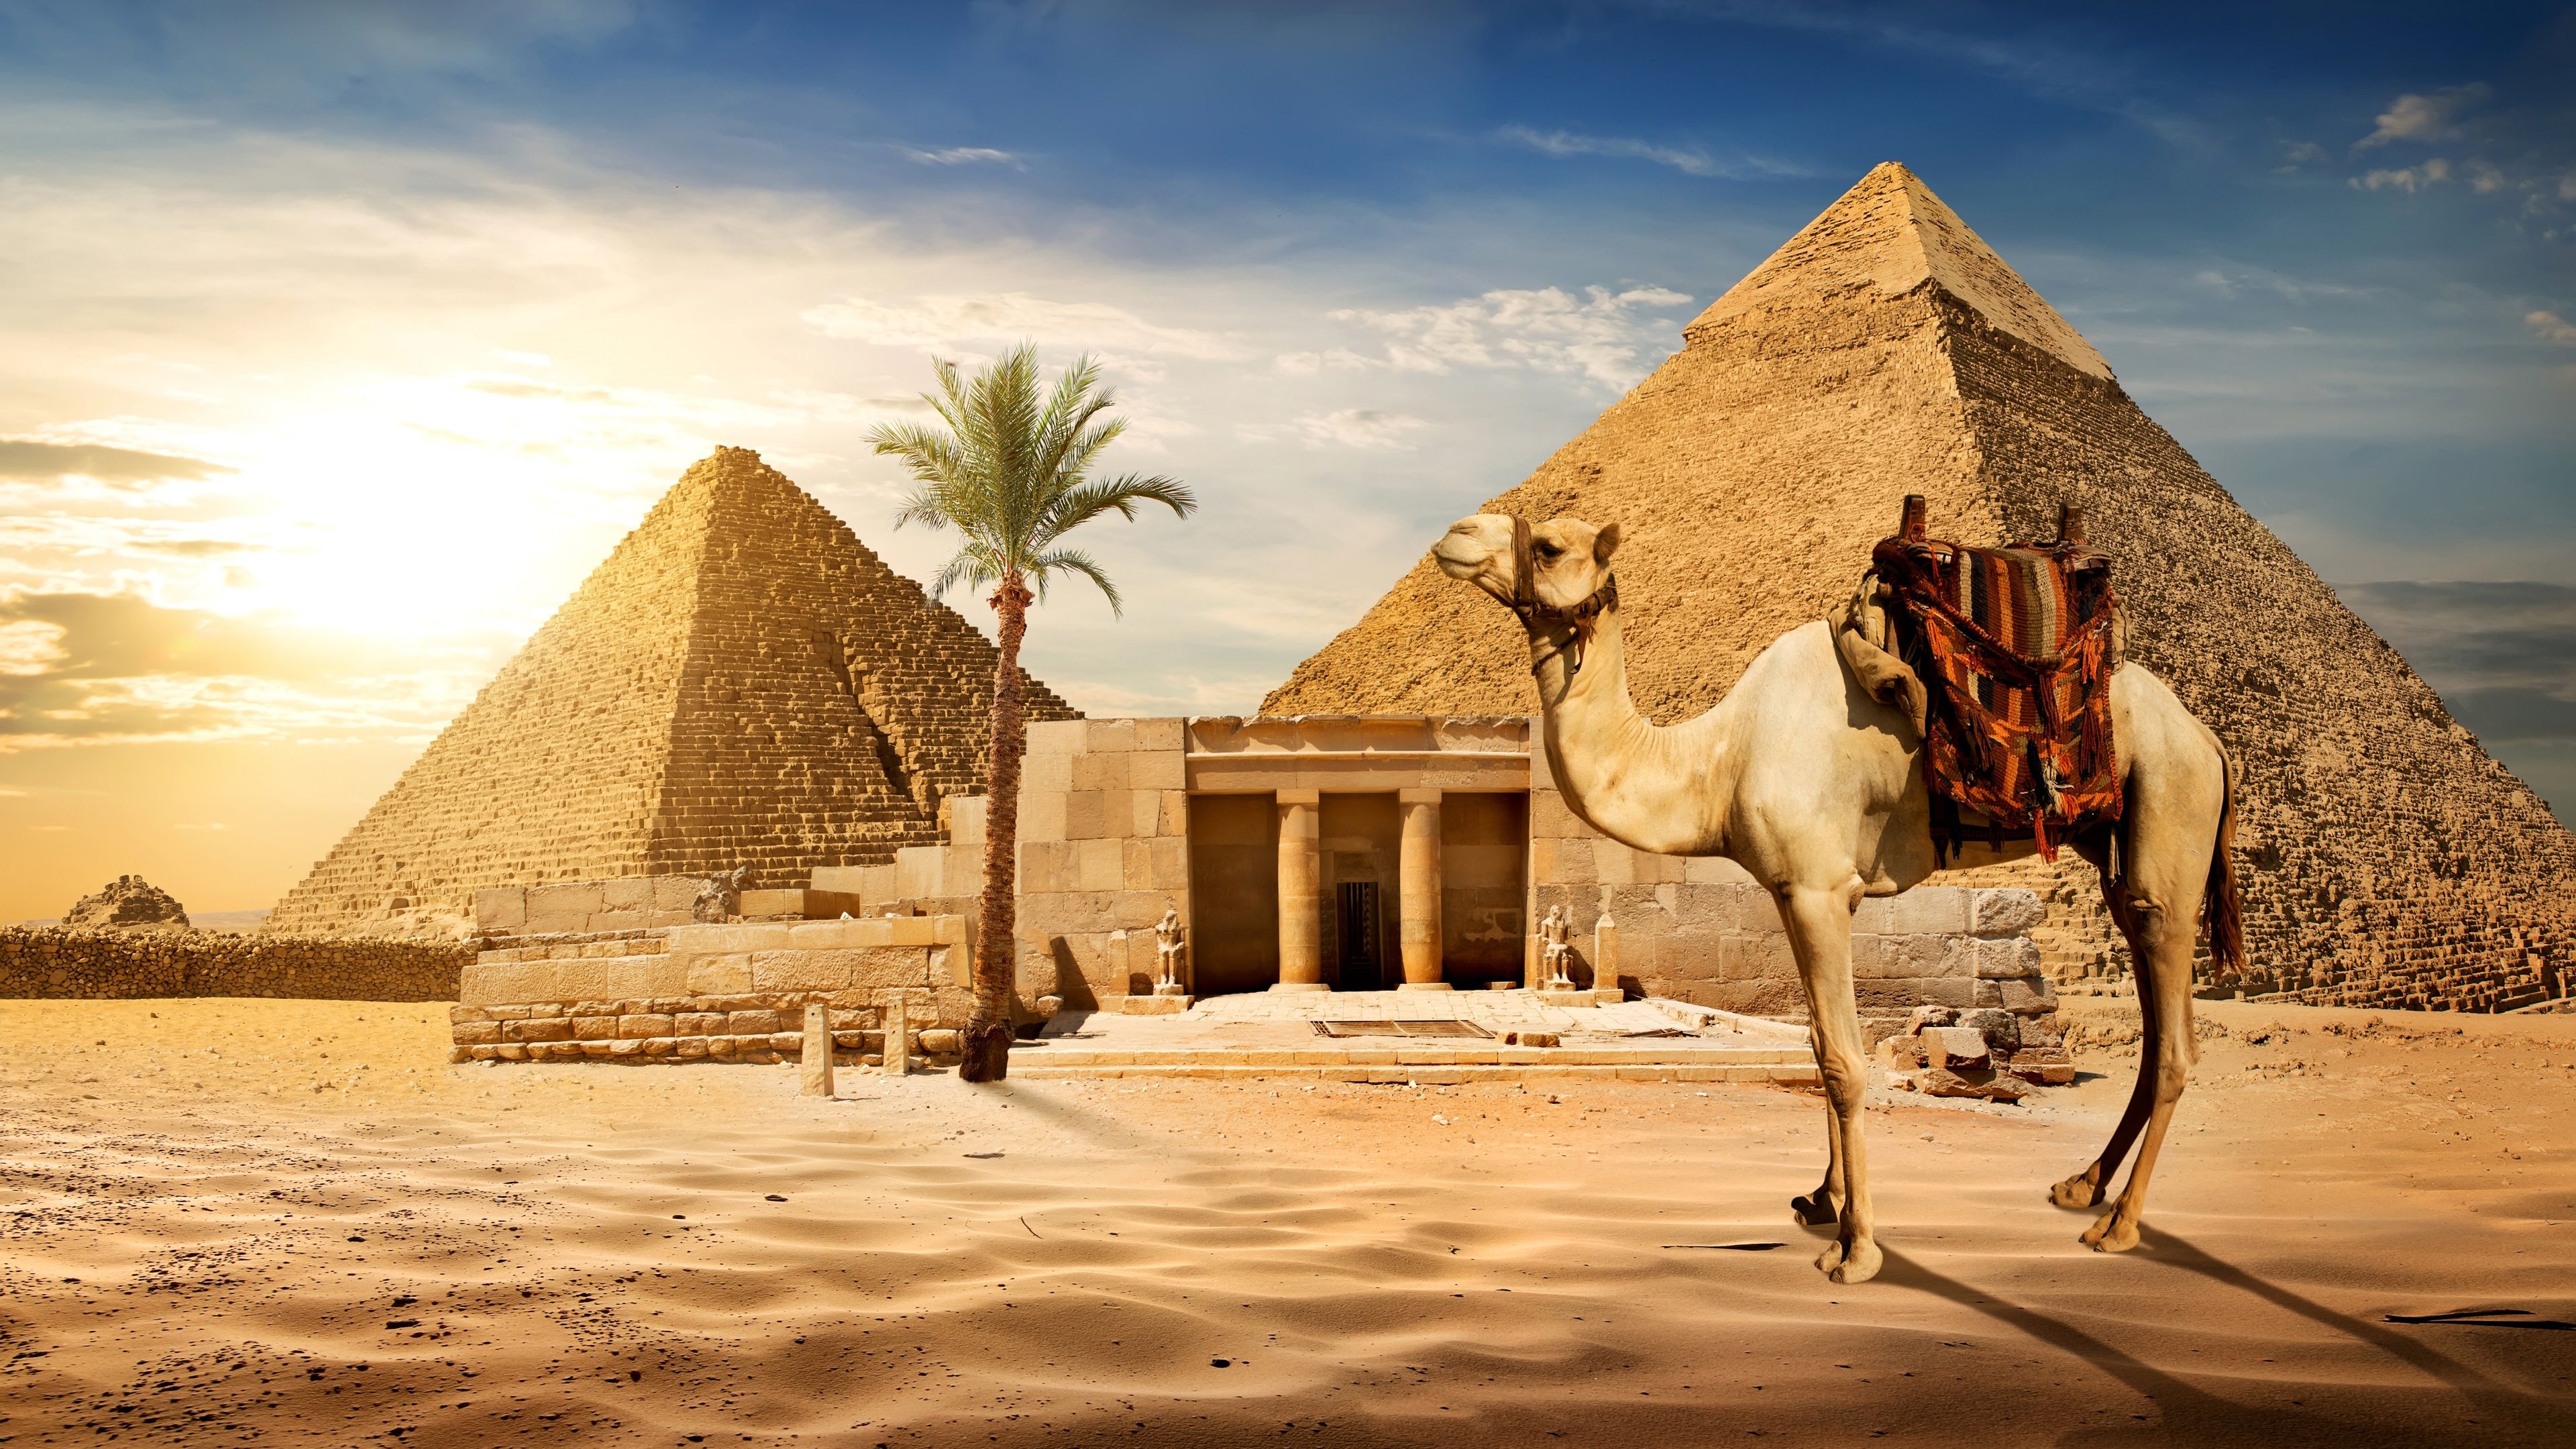 Wallpaper Cairo, pyramid, camel, sands, palm tree, sun, Egypt 3840x2160 UHD 4K Picture, Image